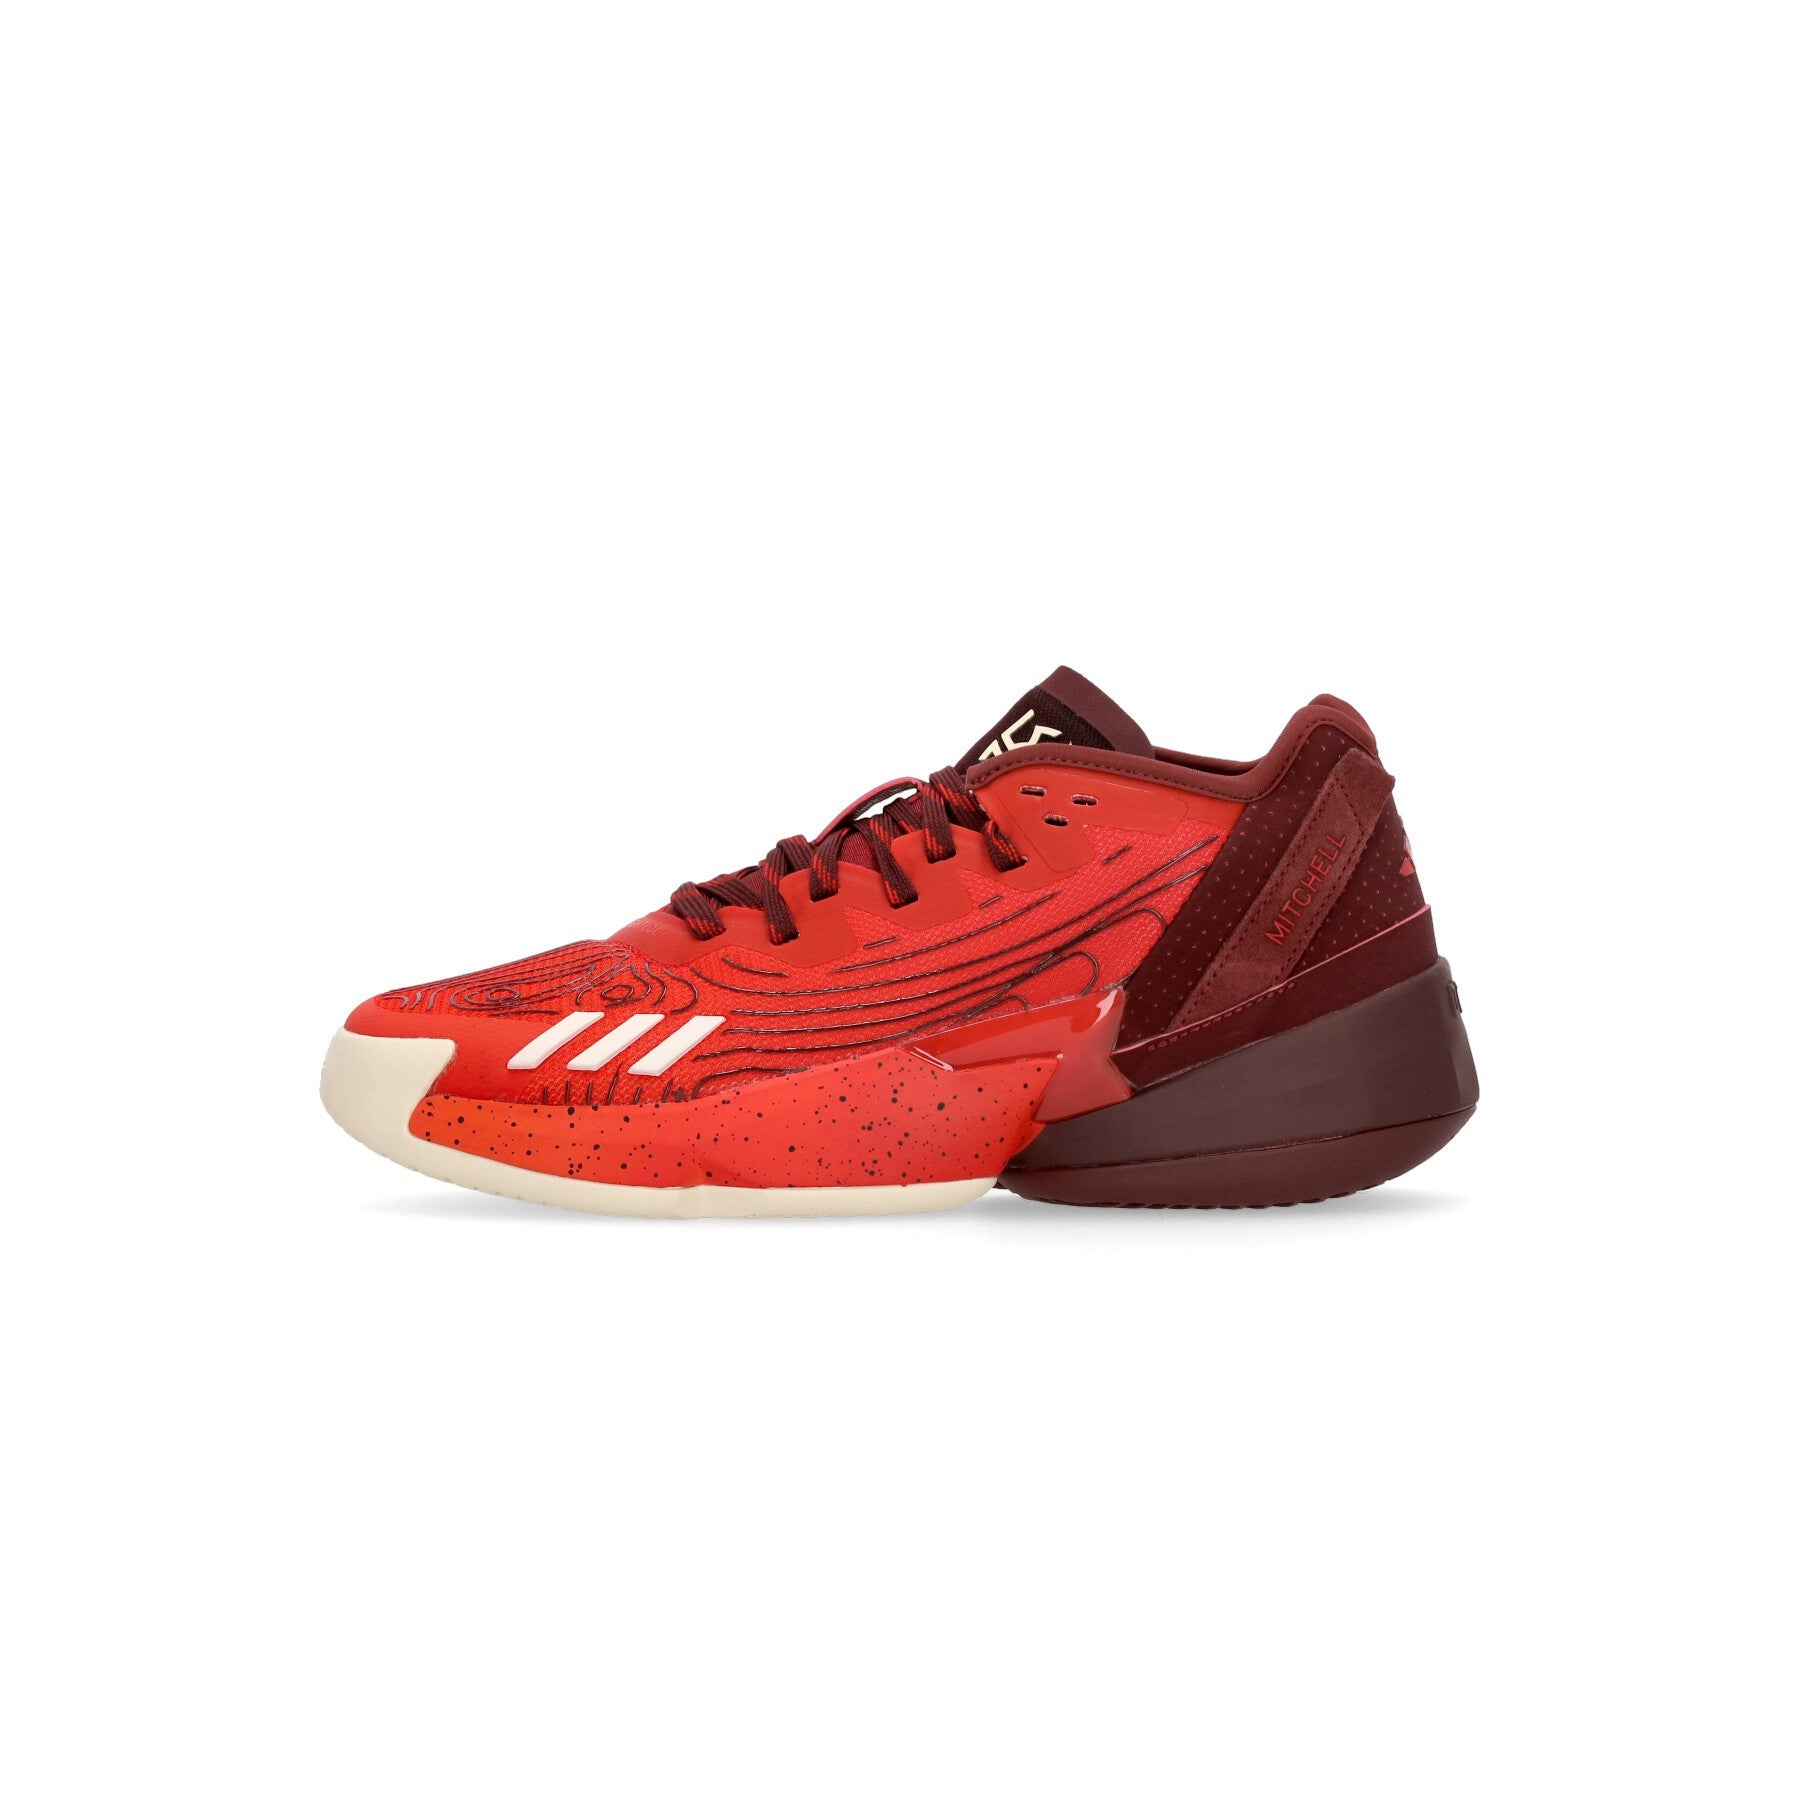 Adidas, Scarpa Basket Uomo D.o.n. Issue 4, Better Scarlet/cloud White/shadow Red